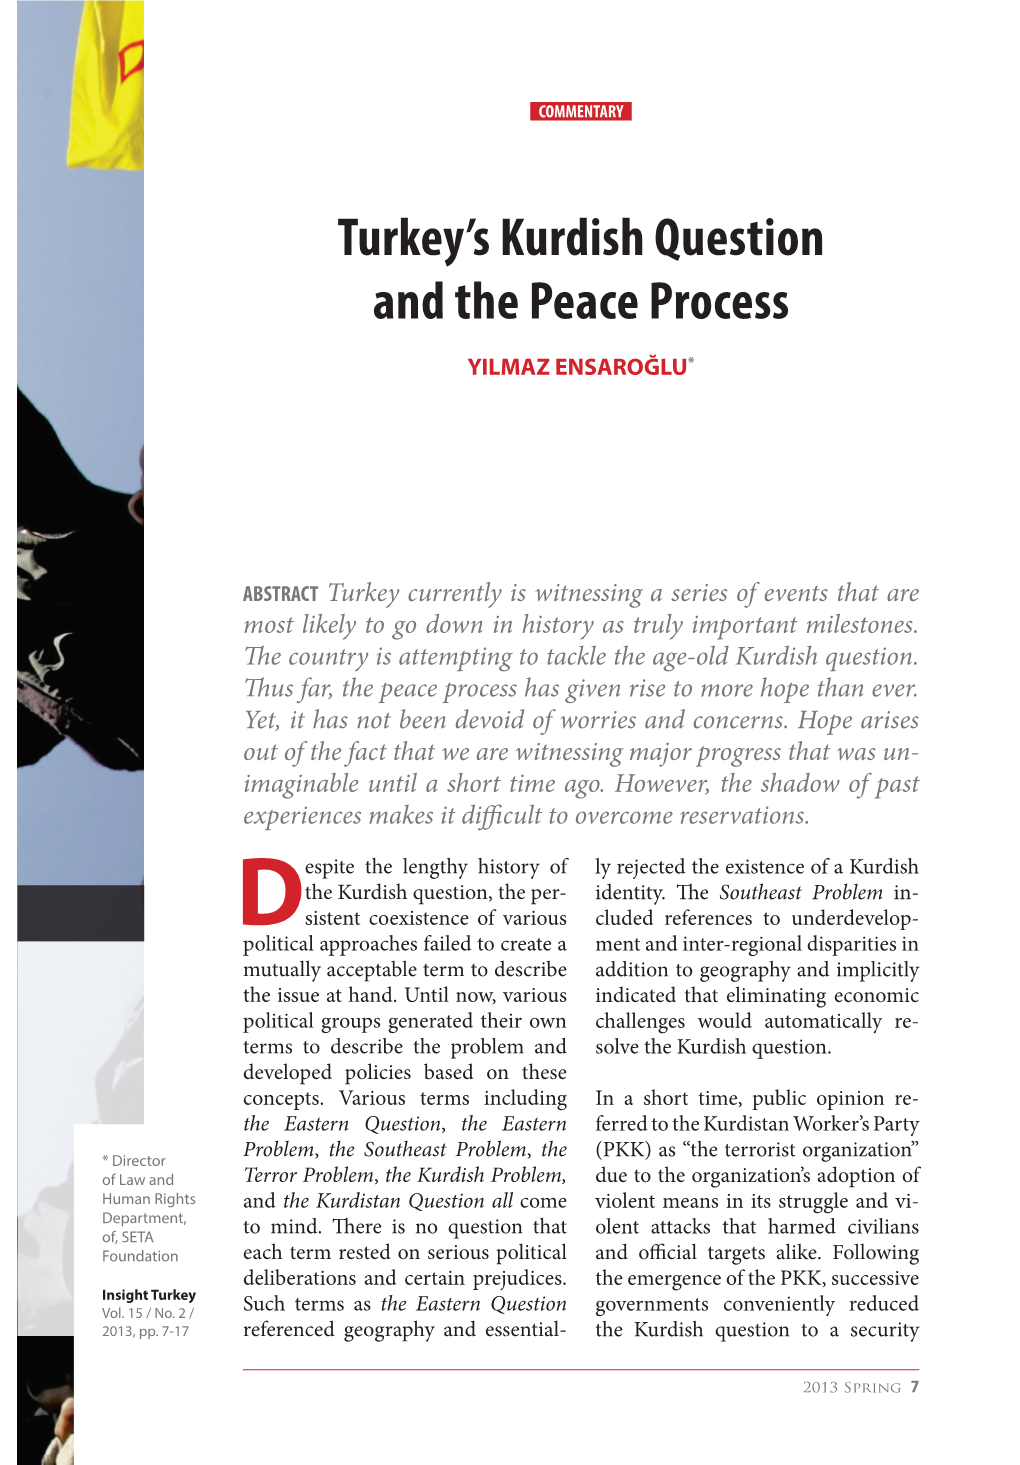 Turkey's Kurdish Question and the Peace Process